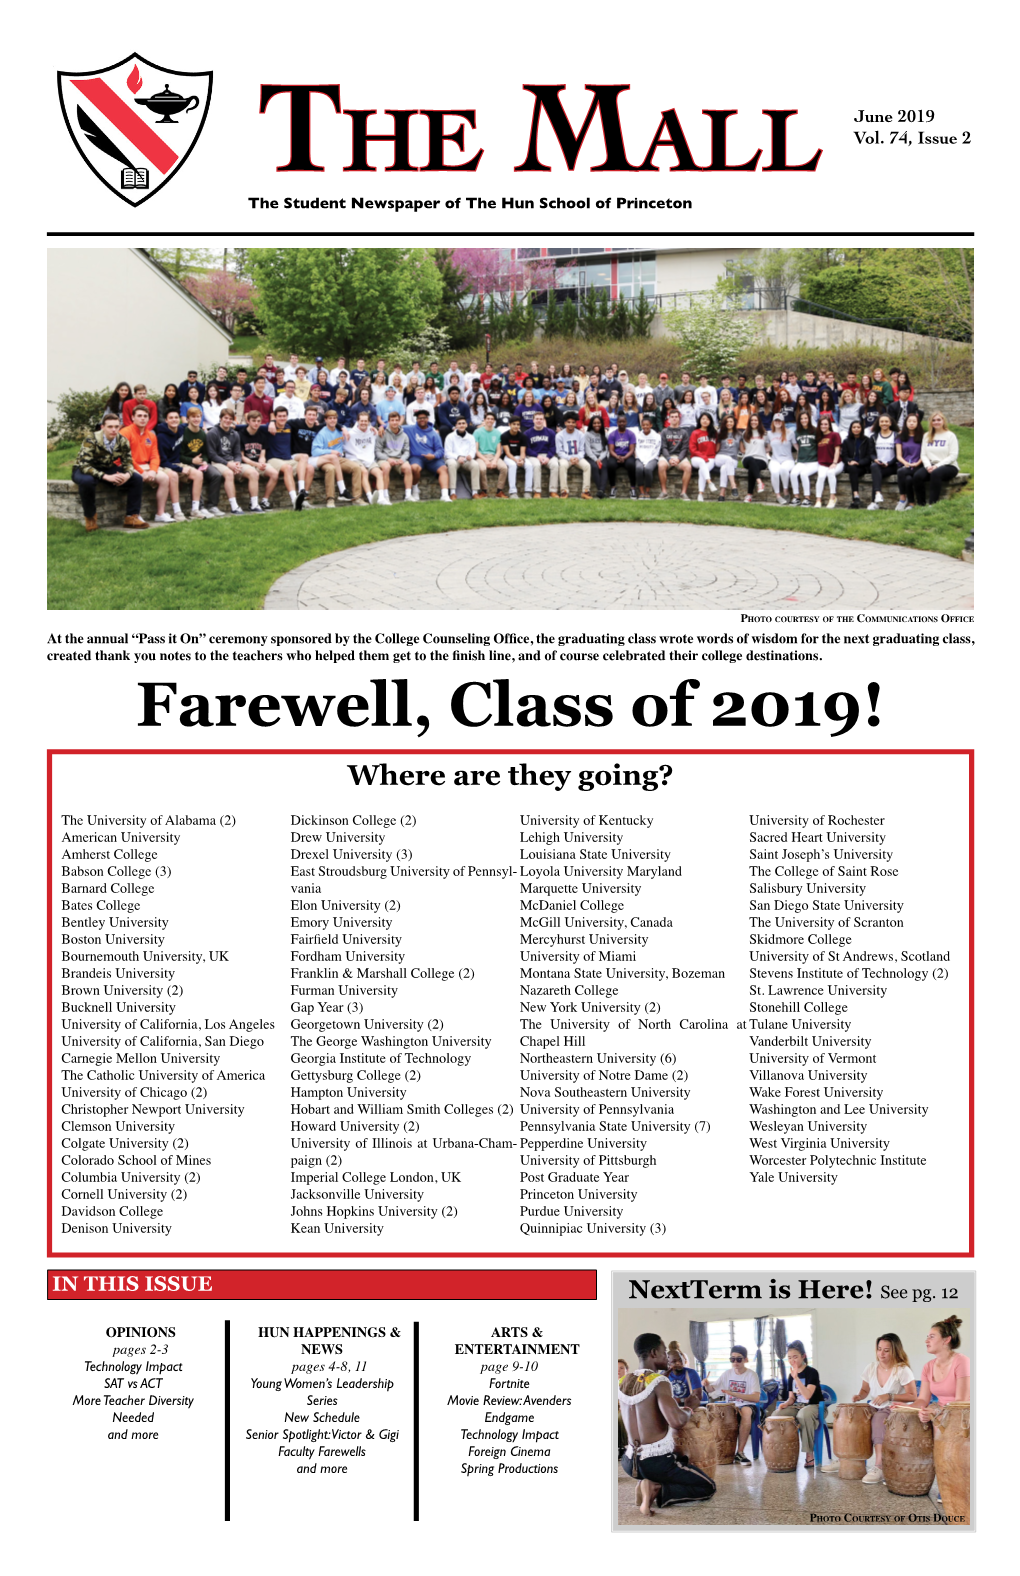 Farewell, Class of 2019! Where Are They Going?